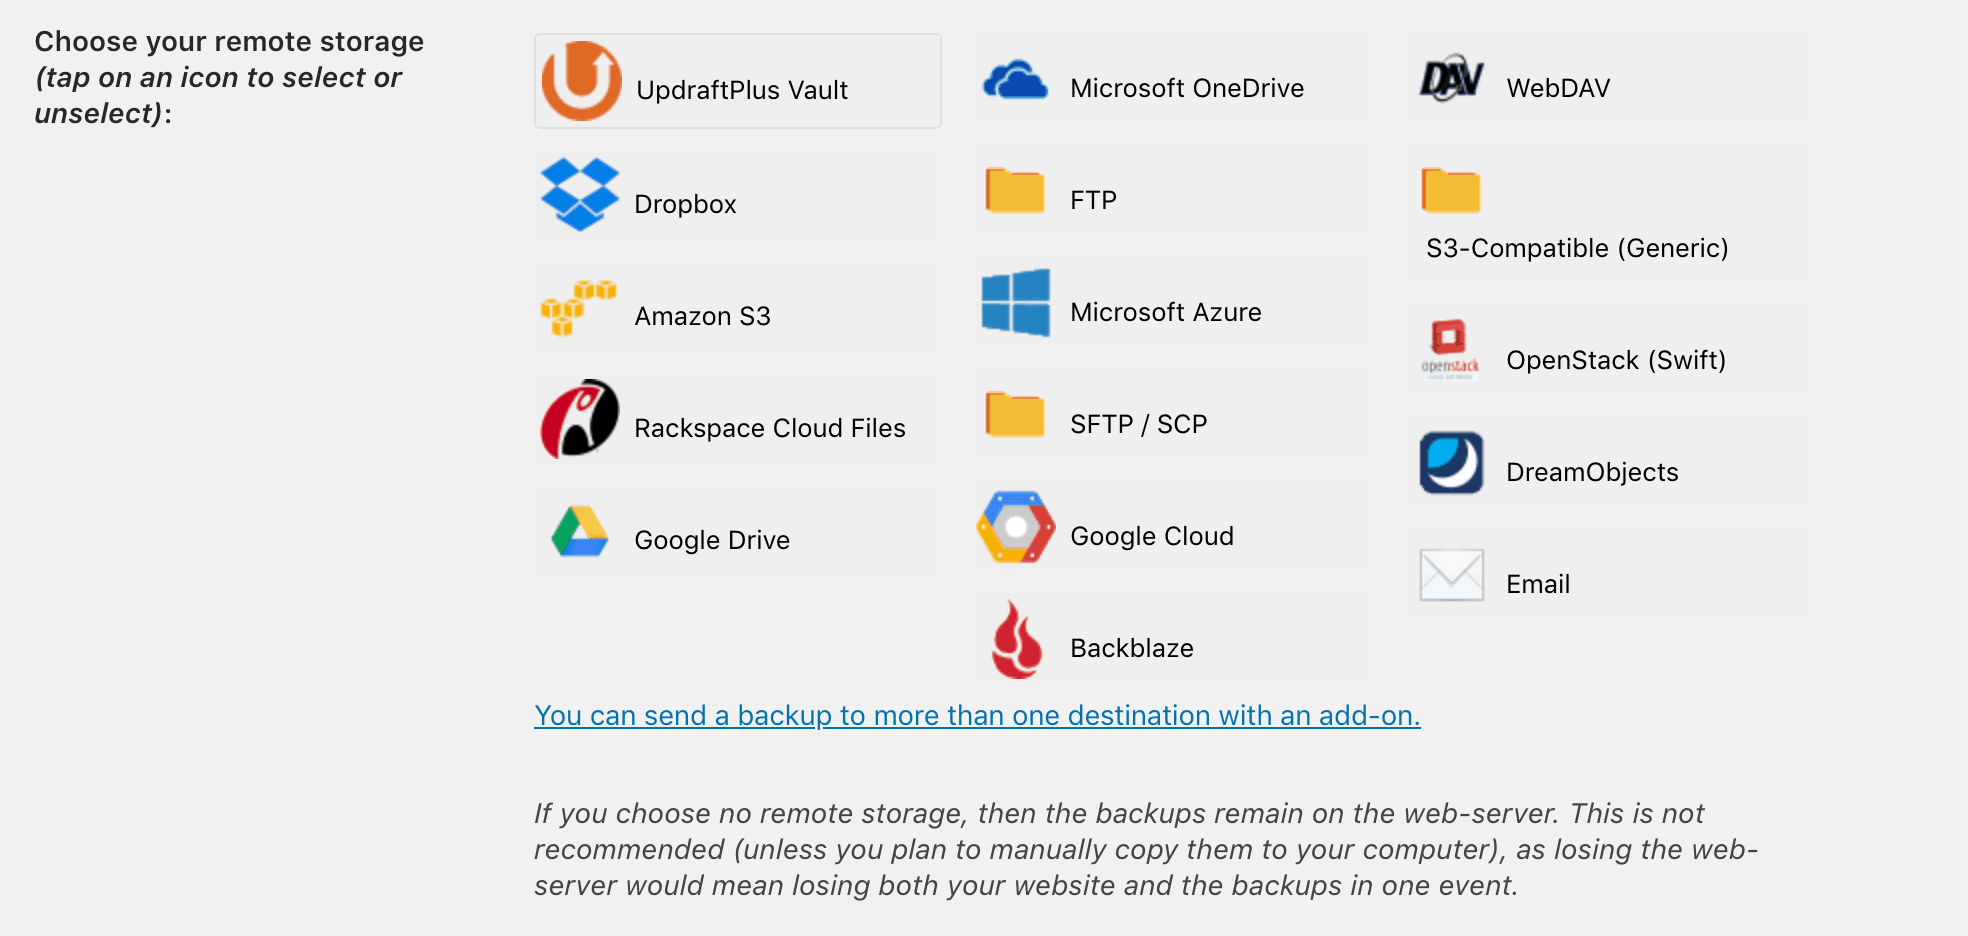 The services you can use to save your backups.